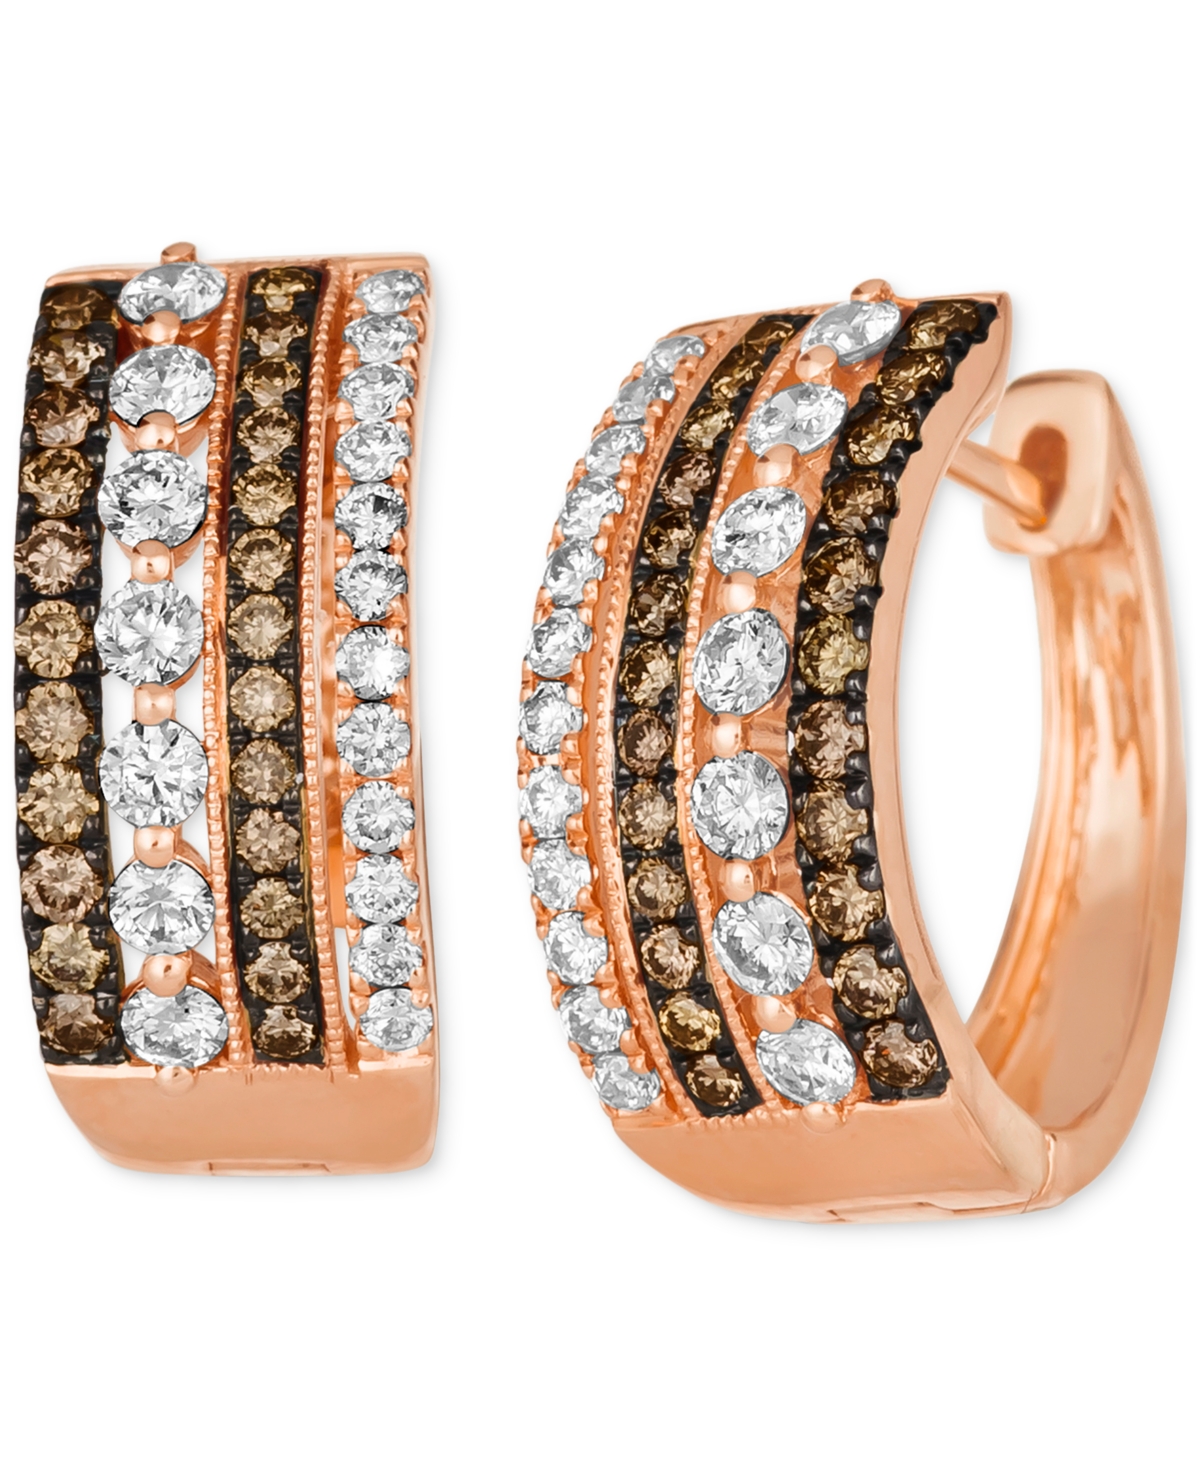 Chocolate Diamond & Nude Diamond Multirow Small Hoop Earrings (1-1/4 ct. t.w.) in 14k Gold, 0.7" (Also Available in Rose Gold) - Rose Gold